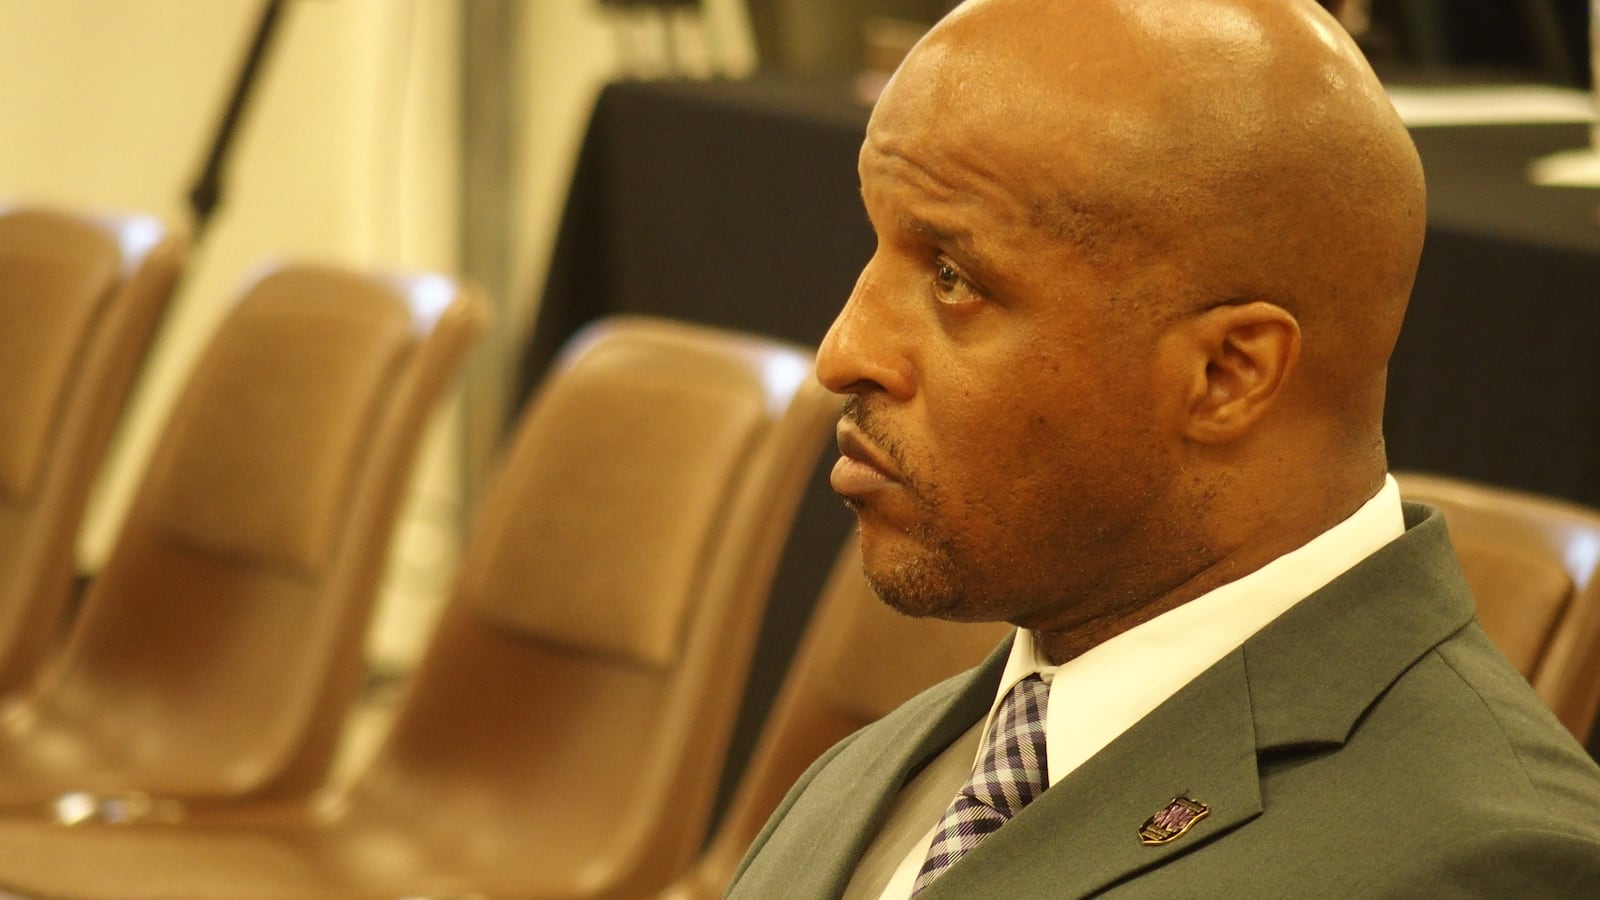 The Shelby County Schools board reaffirmed its decision to fire Teli White, a former football coach at Trezevant High School.